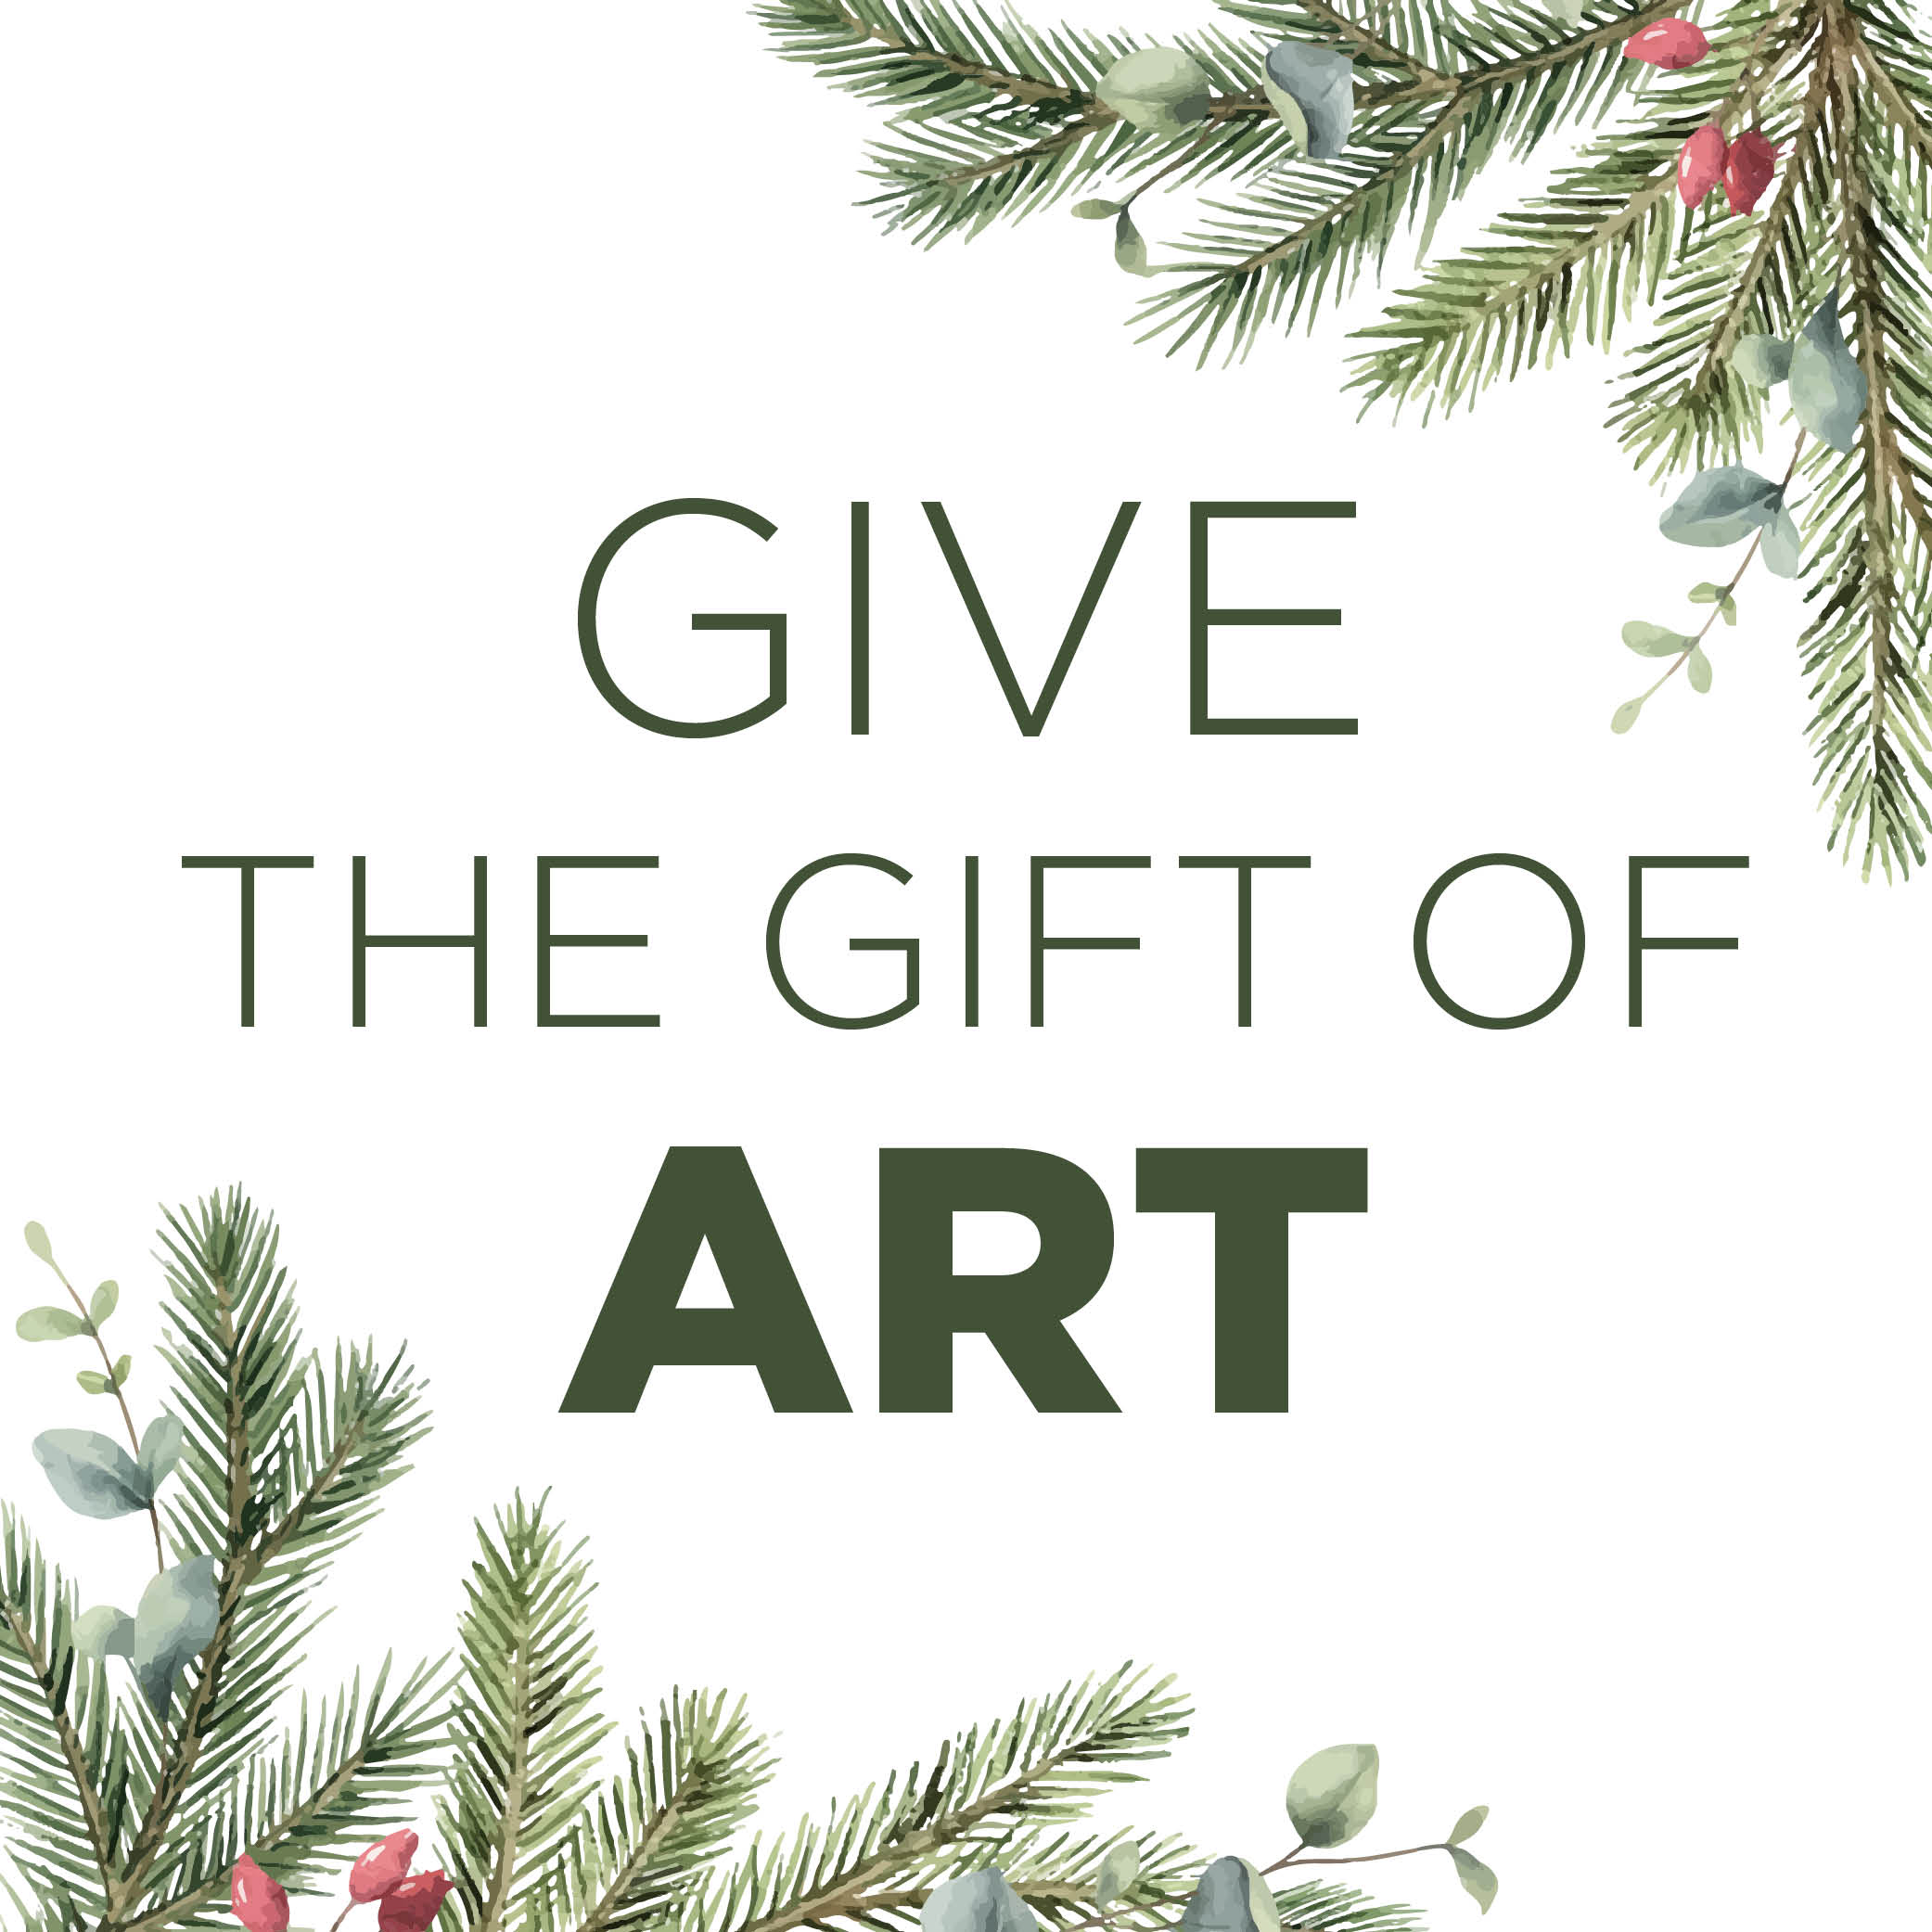 Give the Gift of Art